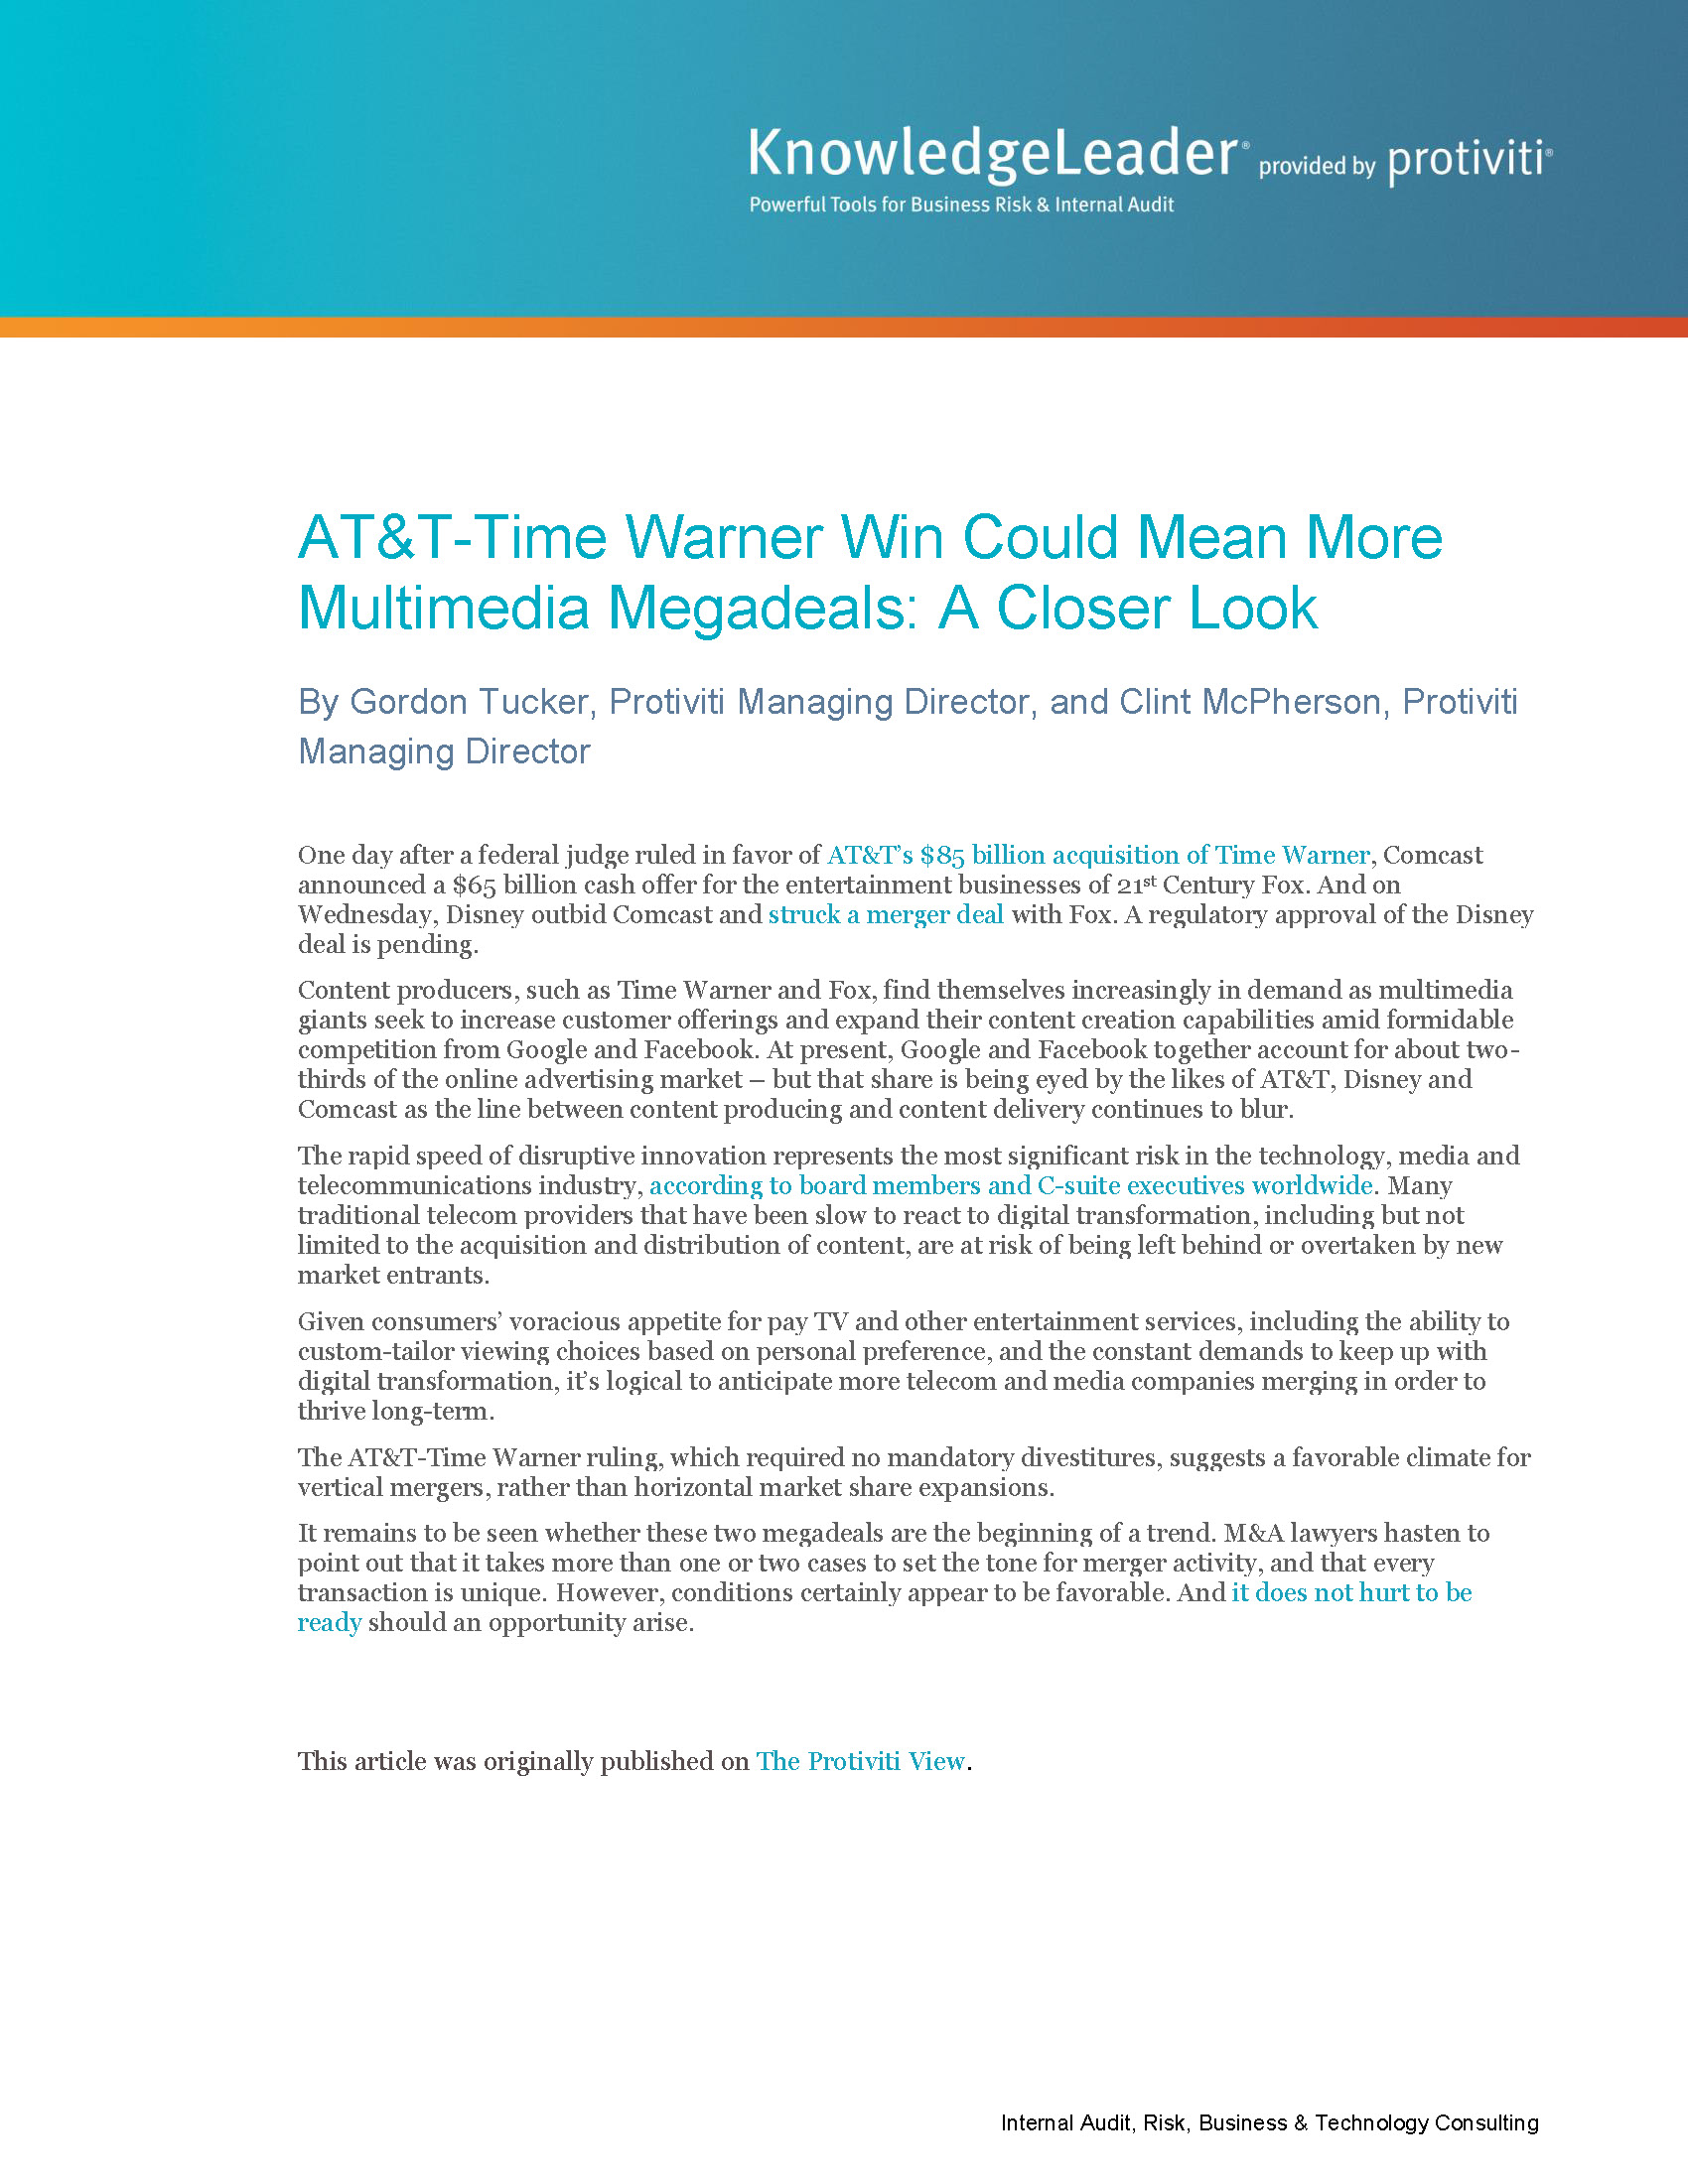 Screenshot of the first page of AT&T-Time Warner Win Could Mean More Multimedia Megadeals A Closer Look